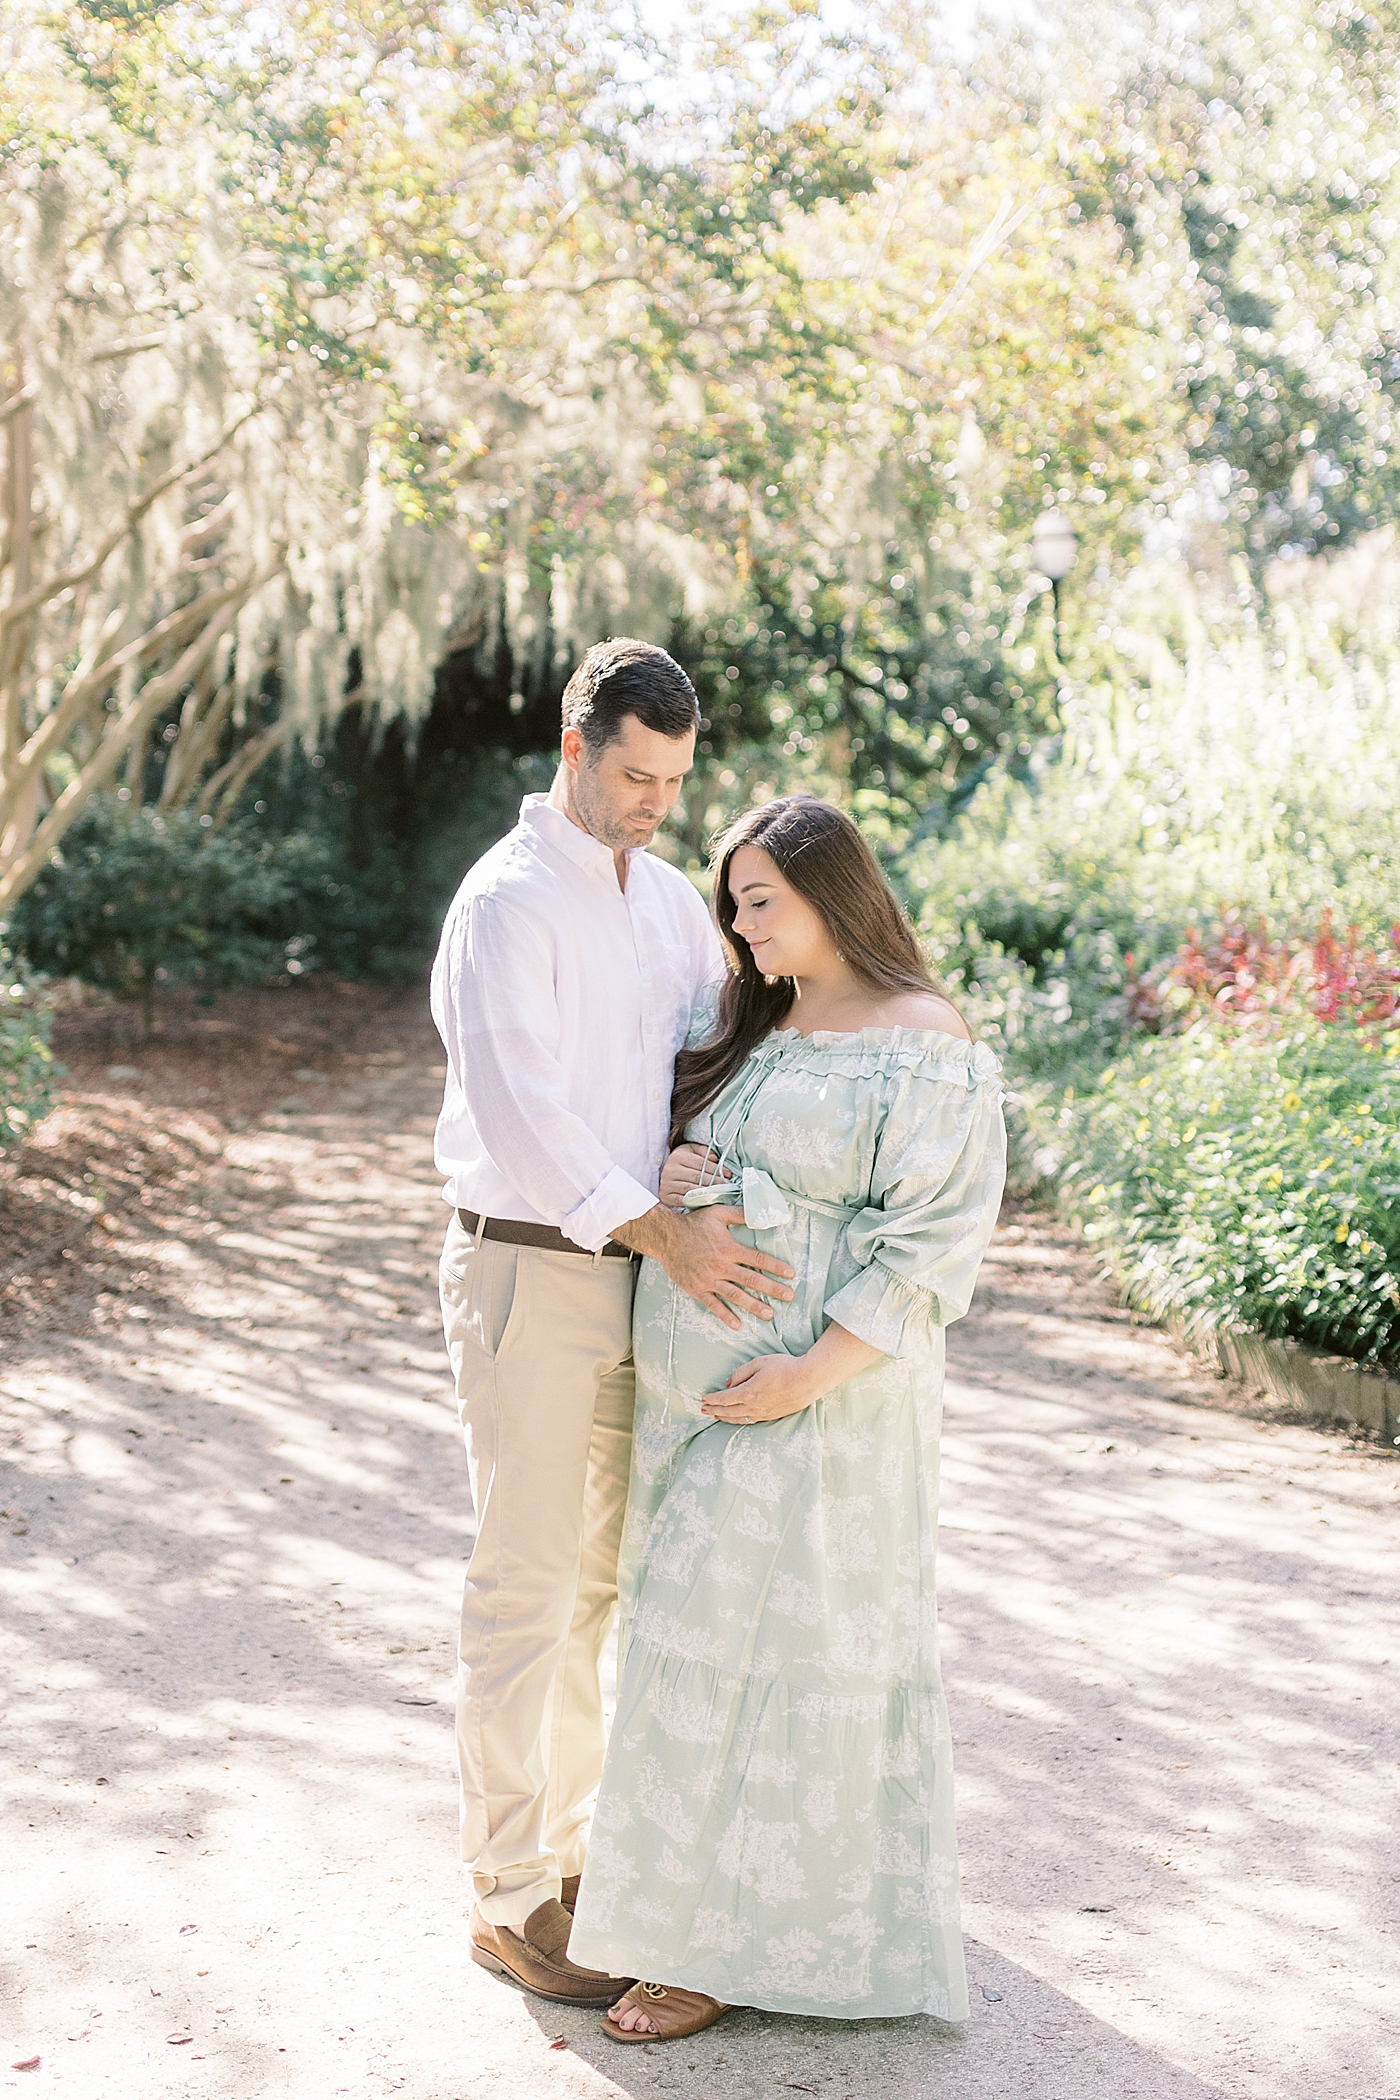 Mom and dad to be embracing in Hampton Park | Image by Caitlyn Motycka